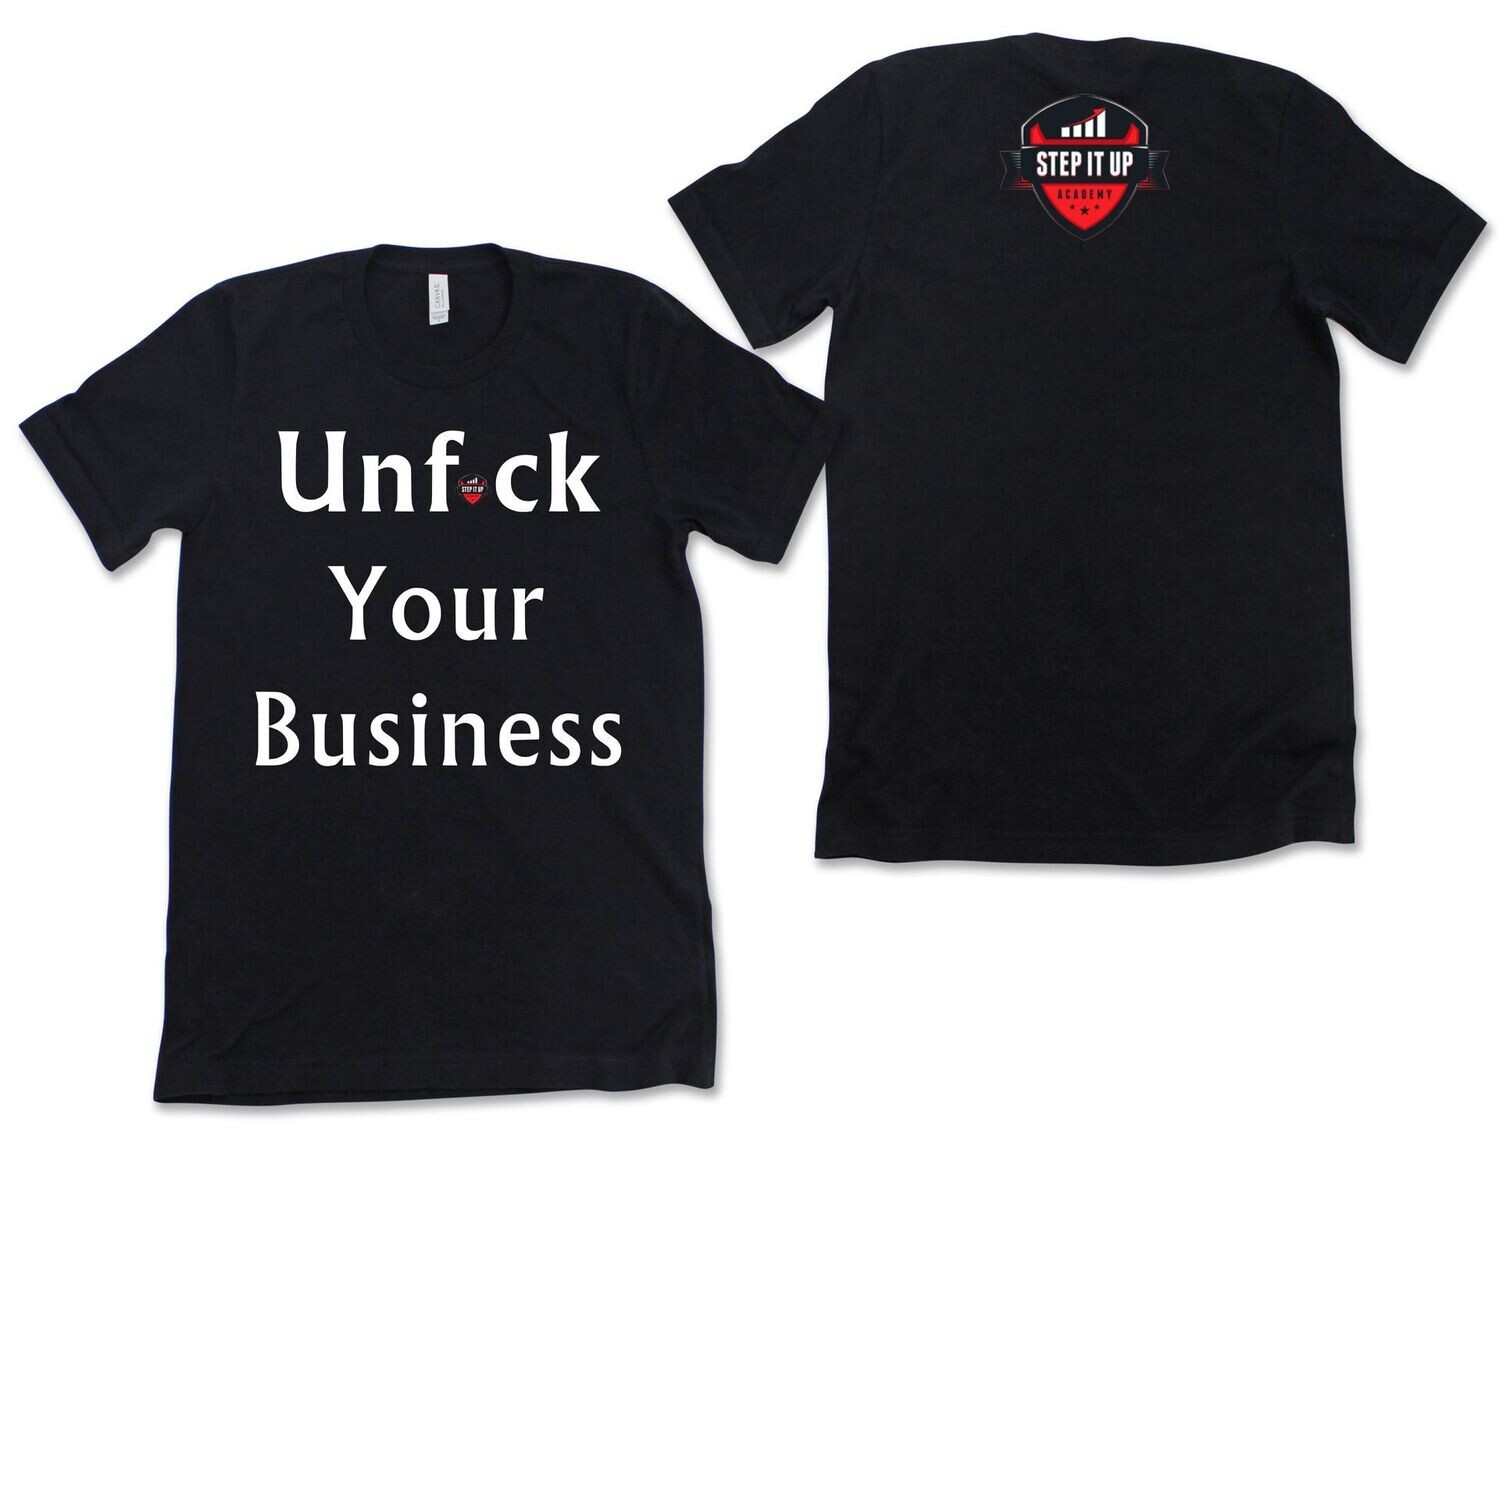 Unf_ck Your Business Tee - Black